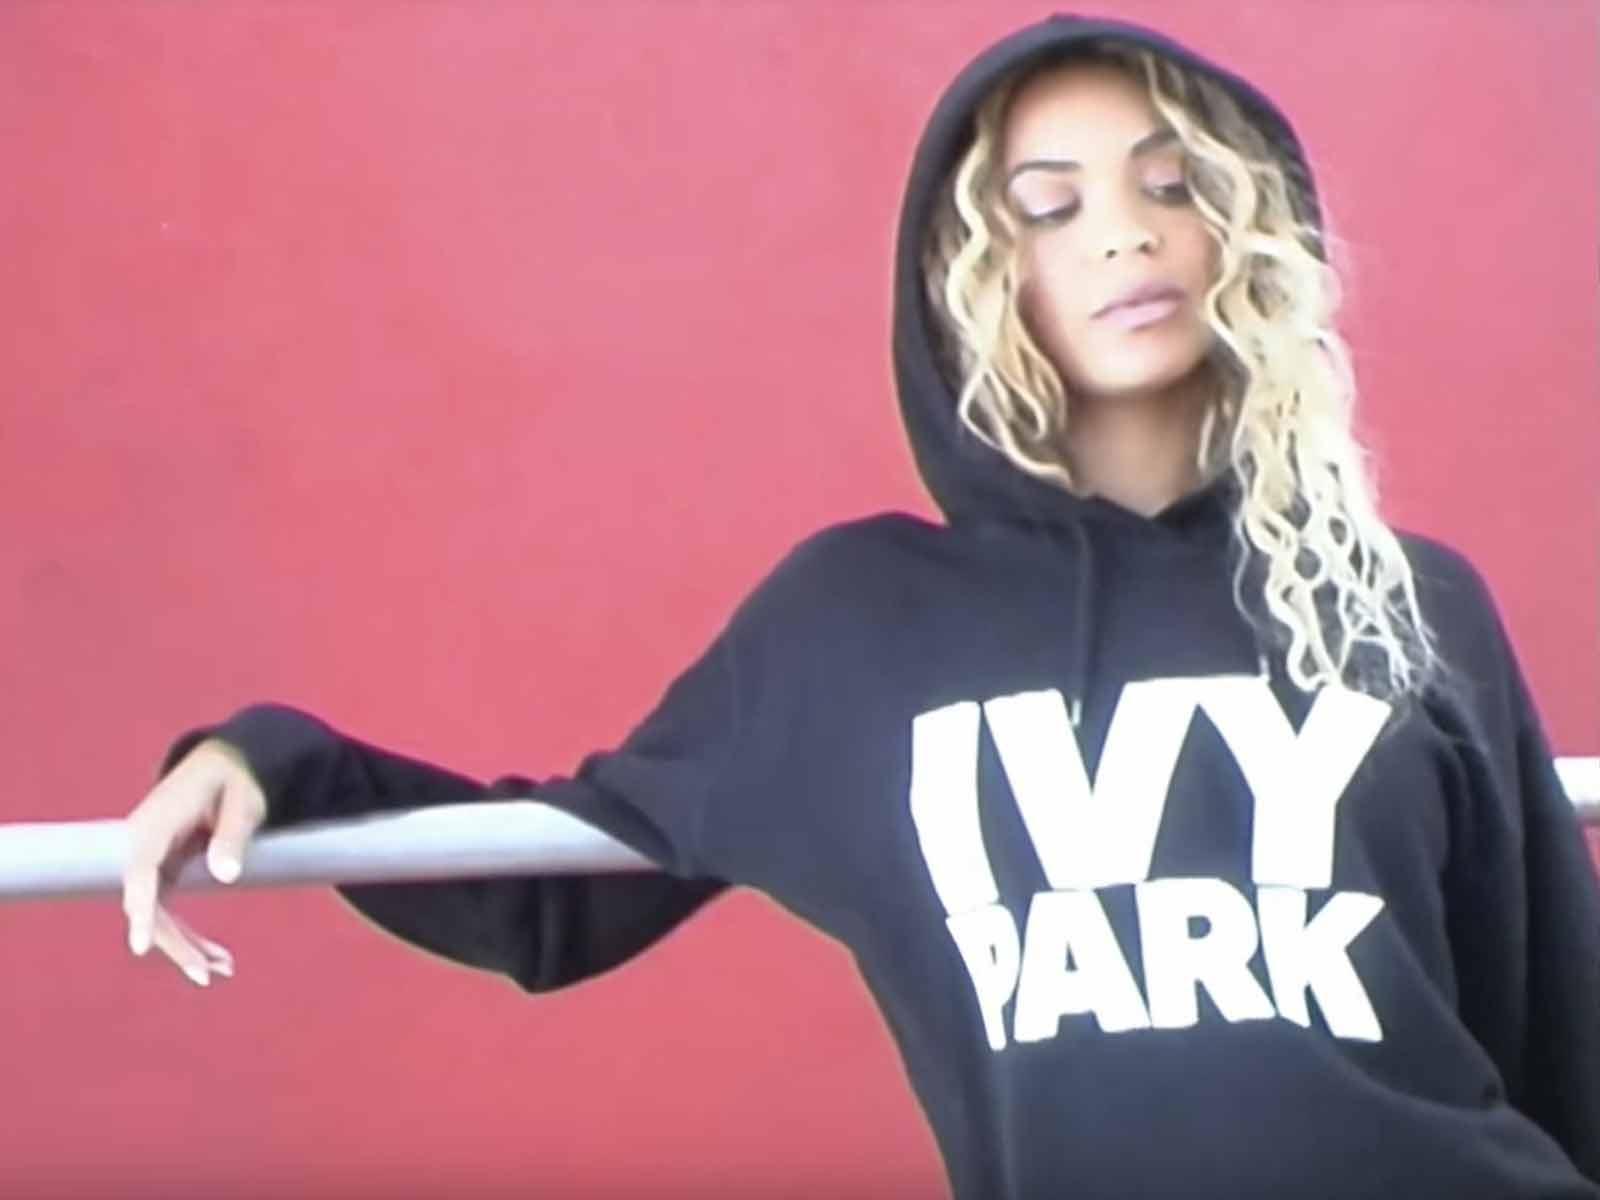 Beyoncé Clothing Line Ivy Park Embroiled in Legal Battle to Protect Its Name